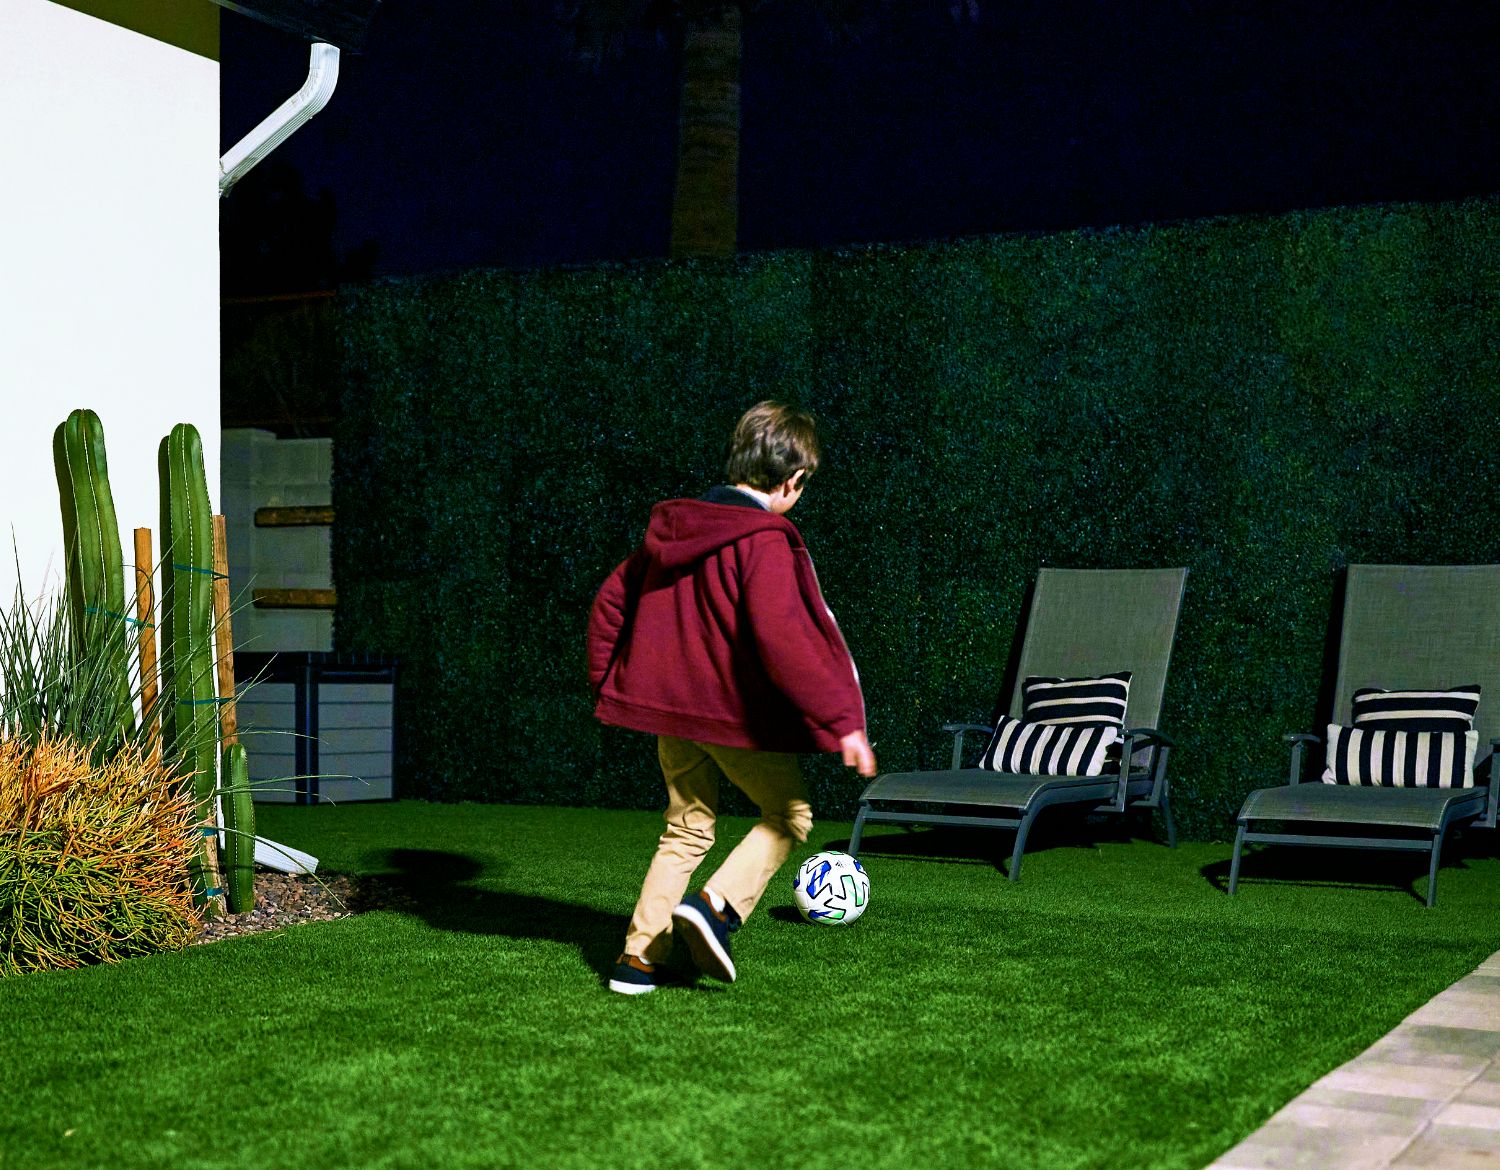 An image shows a young boy playing football in the garden at night, captured by an Arlo Ultra 2XL security camera